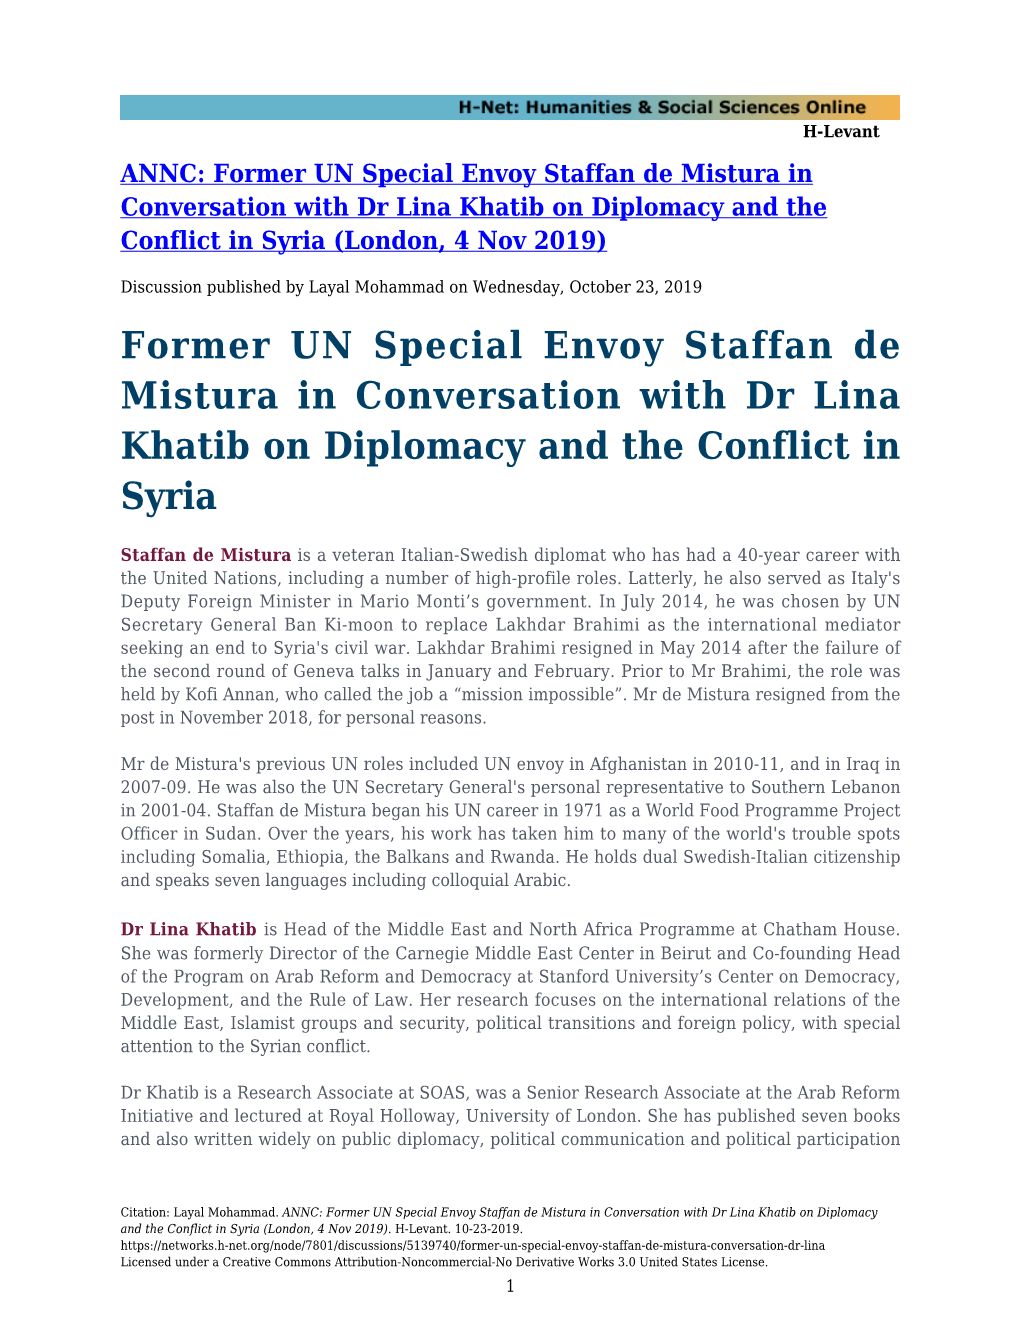 Former UN Special Envoy Staffan De Mistura in Conversation with Dr Lina Khatib on Diplomacy and the Conflict in Syria (London, 4 Nov 2019)